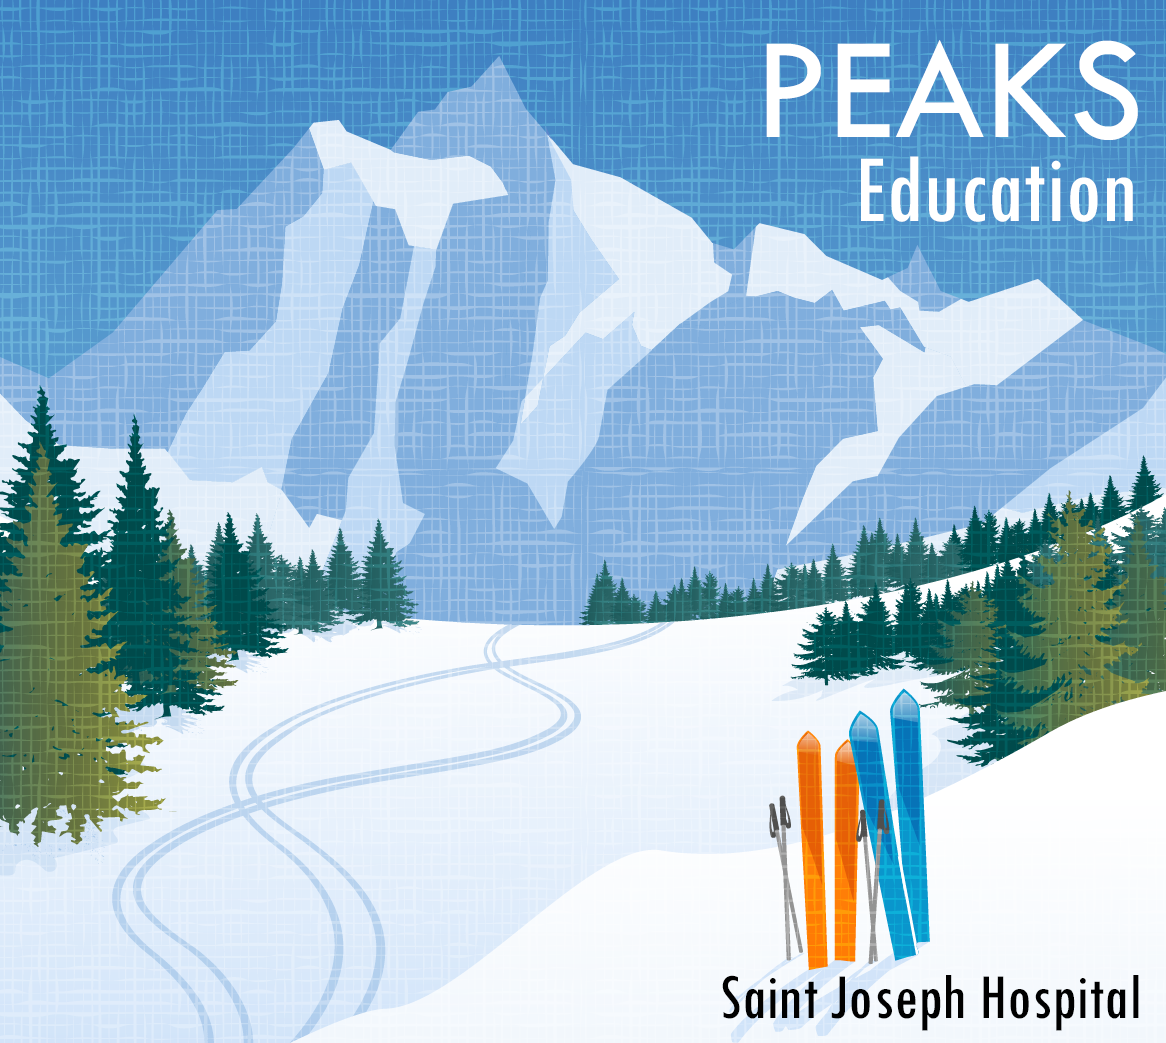 PEAKS SJH_Trauma Operations Review Committee Banner